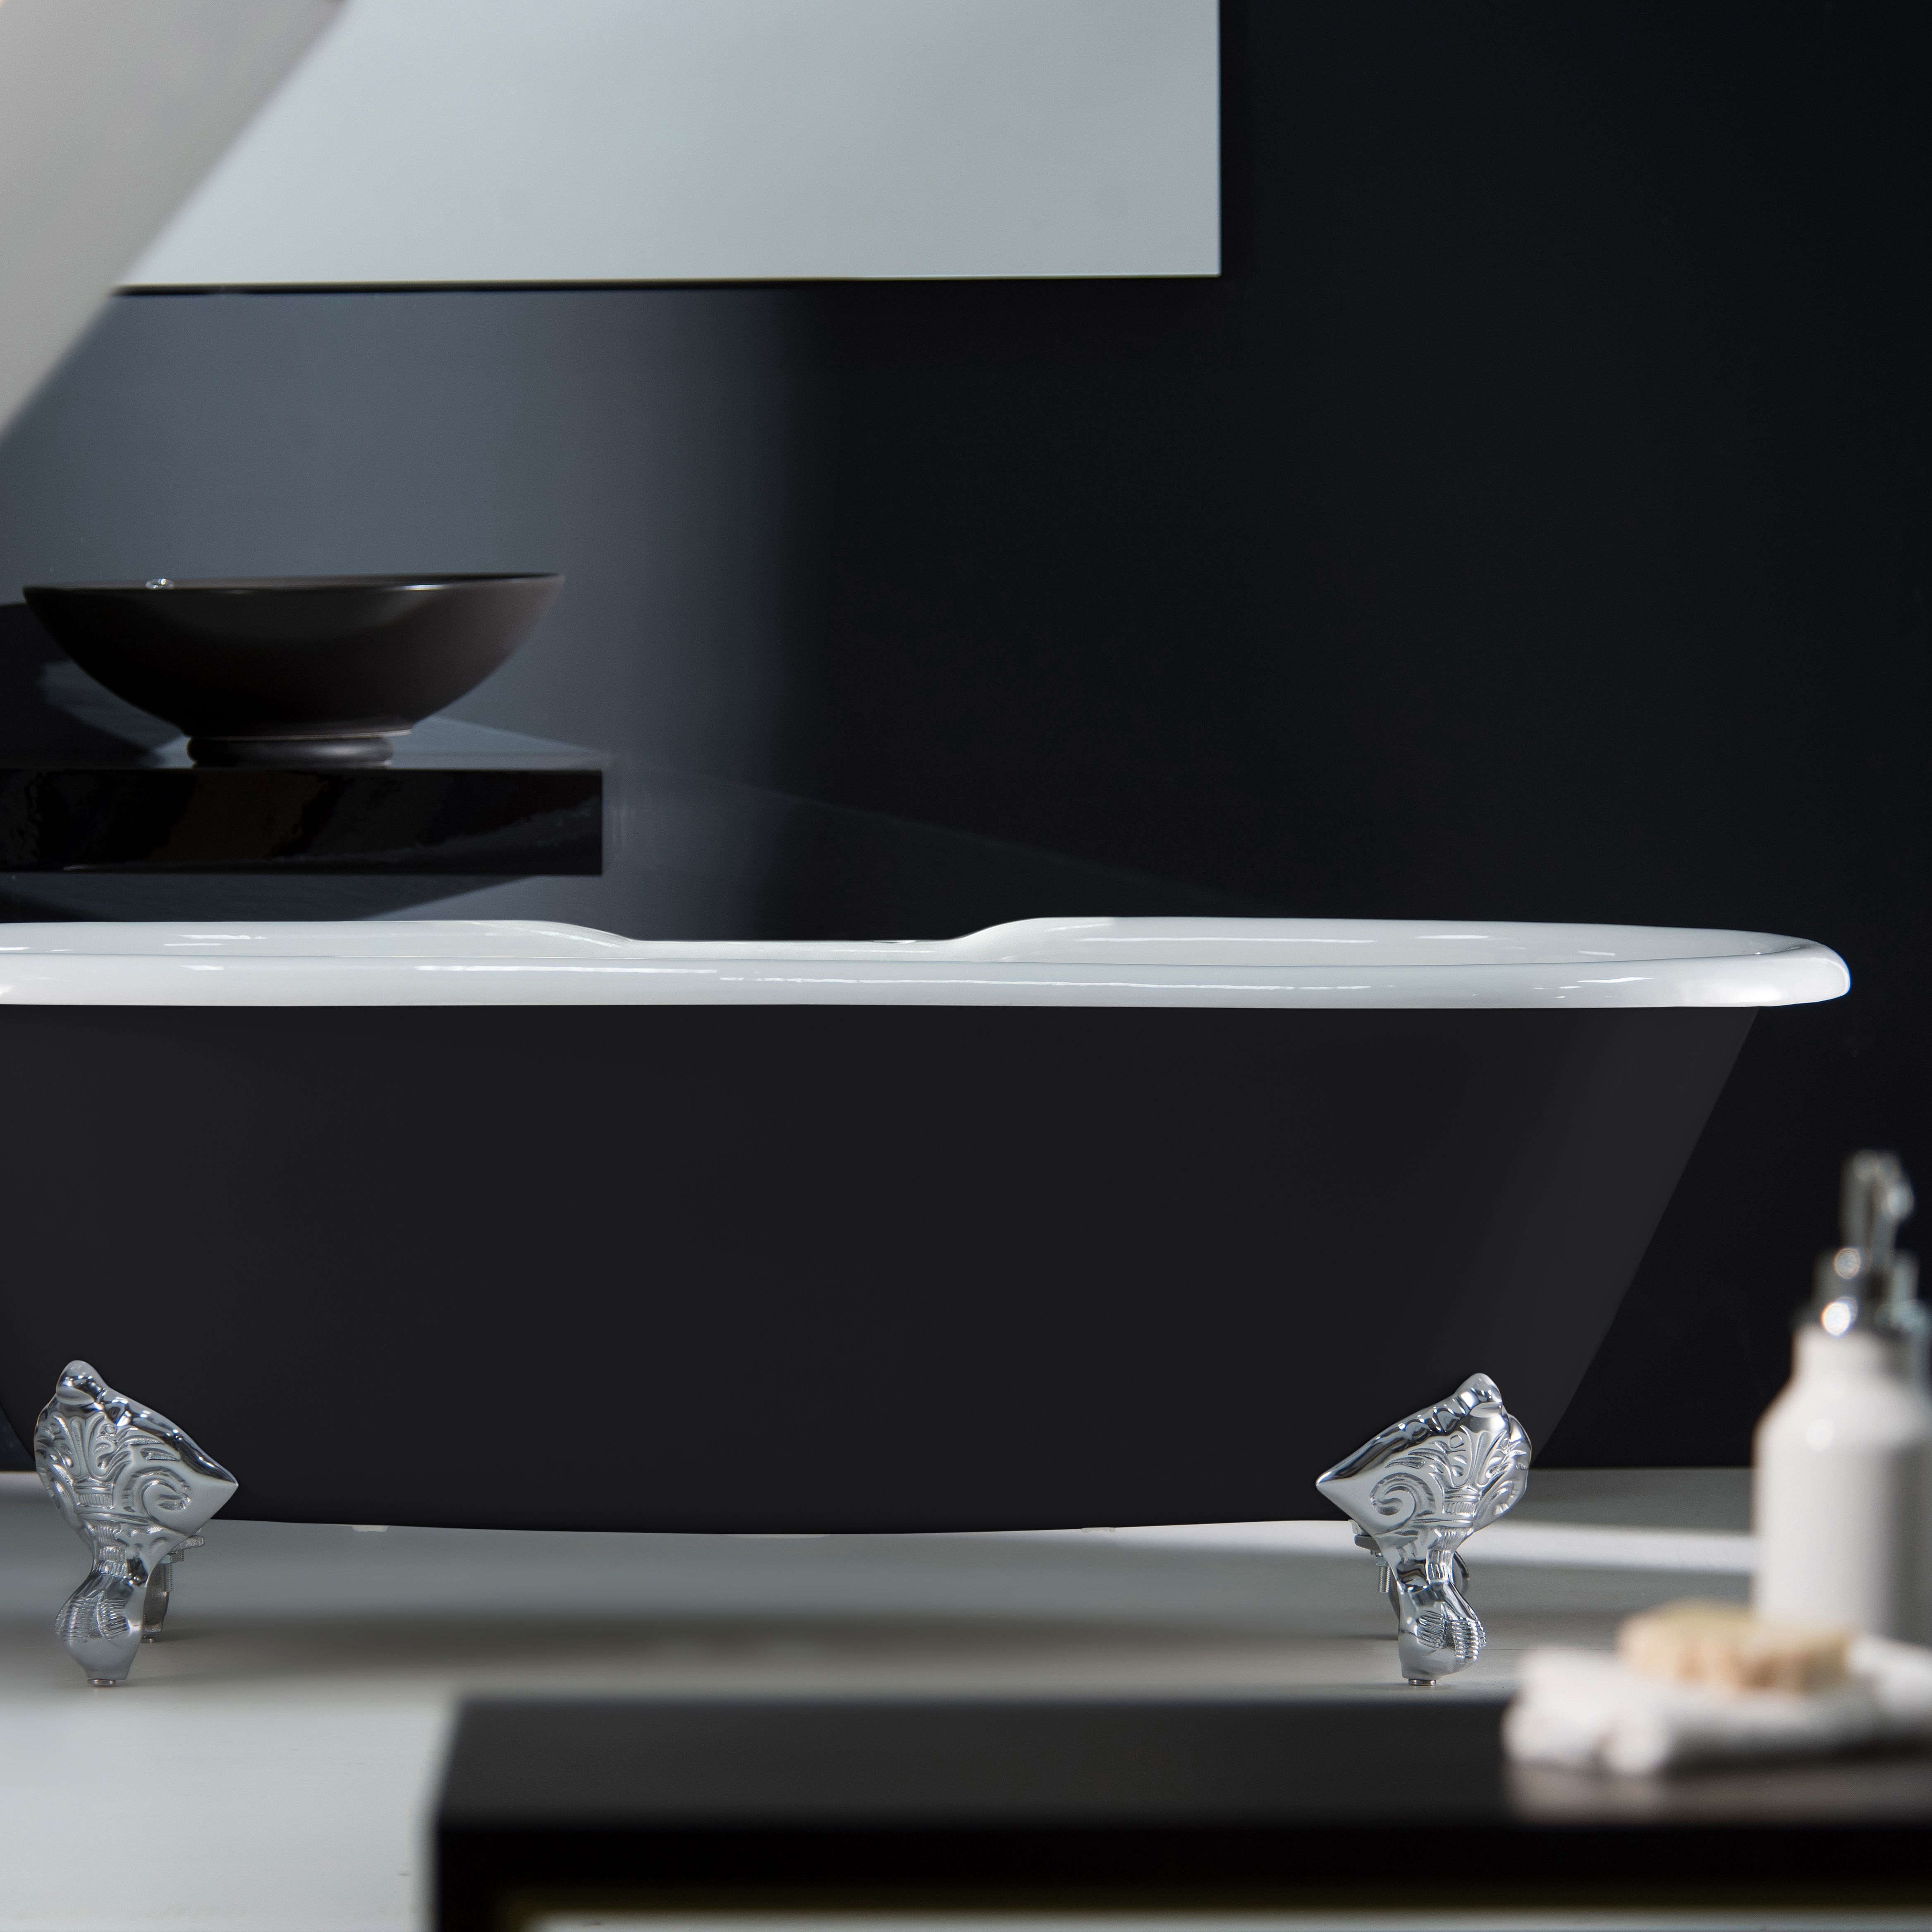 Arroll Moulin Gloss Black Roll-top Double ended Bath with 2 Tap holes (L)170cm (W)77cm